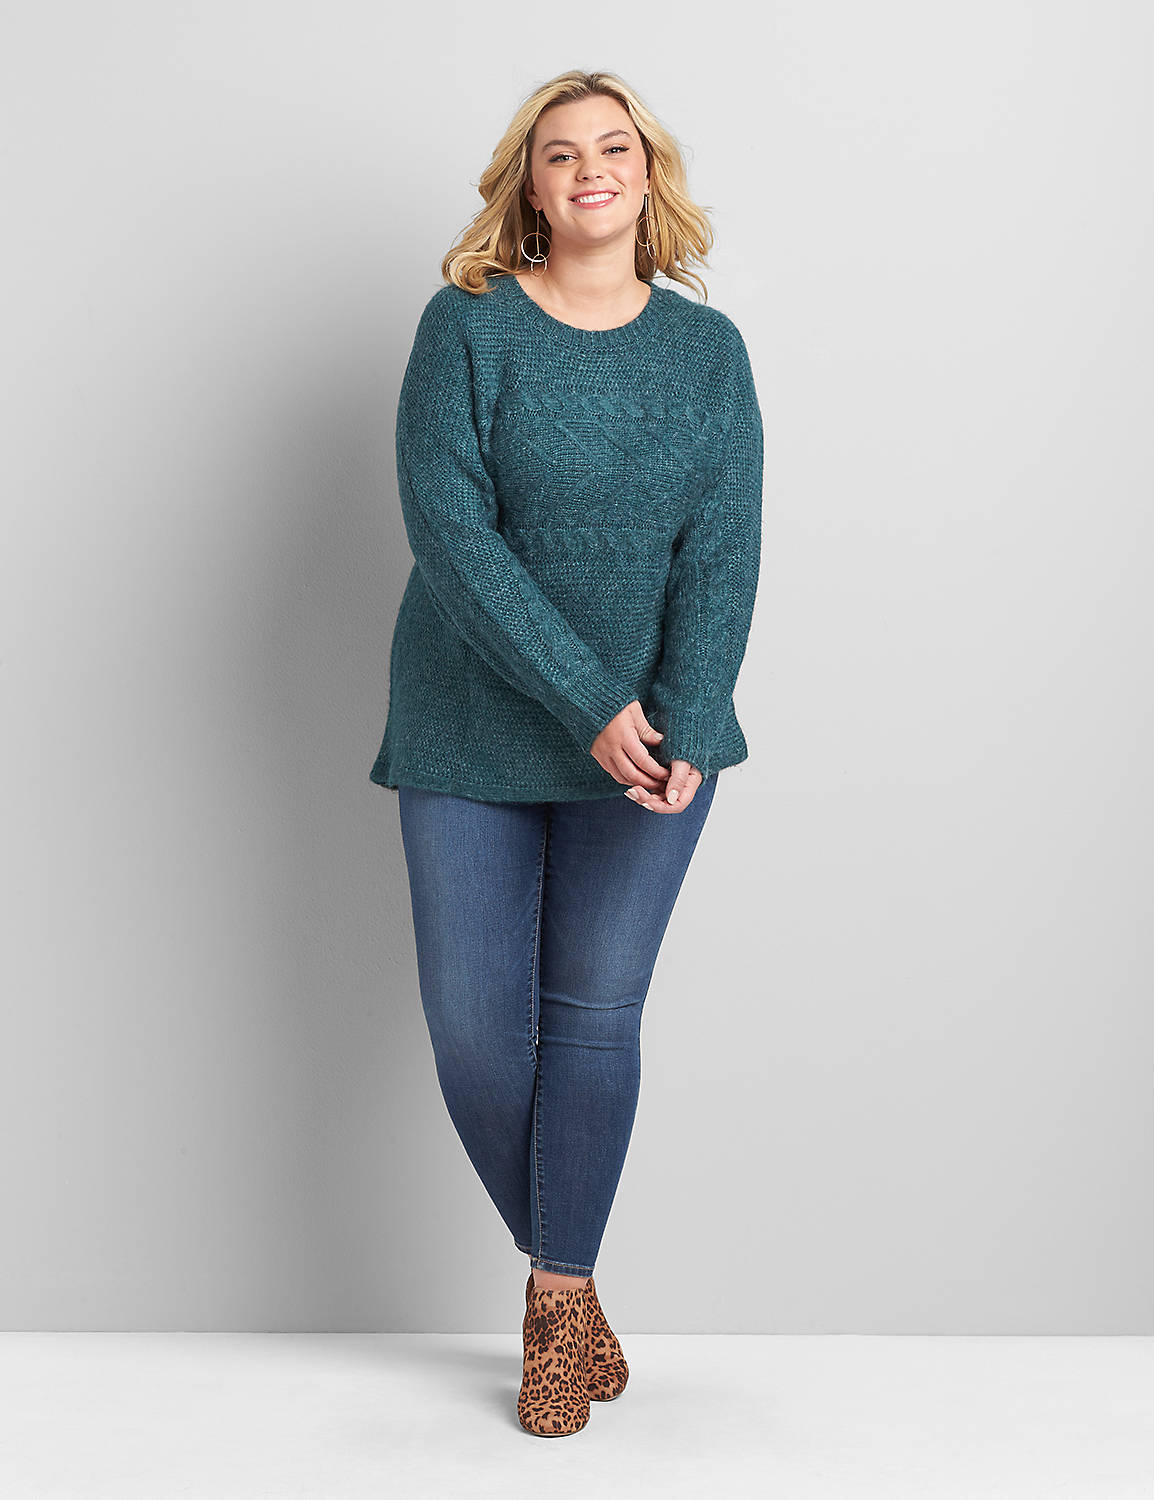 Long Sleeve Crew Neck Pullover with Horizontal Cable 1118269:PANTONE Deep Teal:22/24 Product Image 3